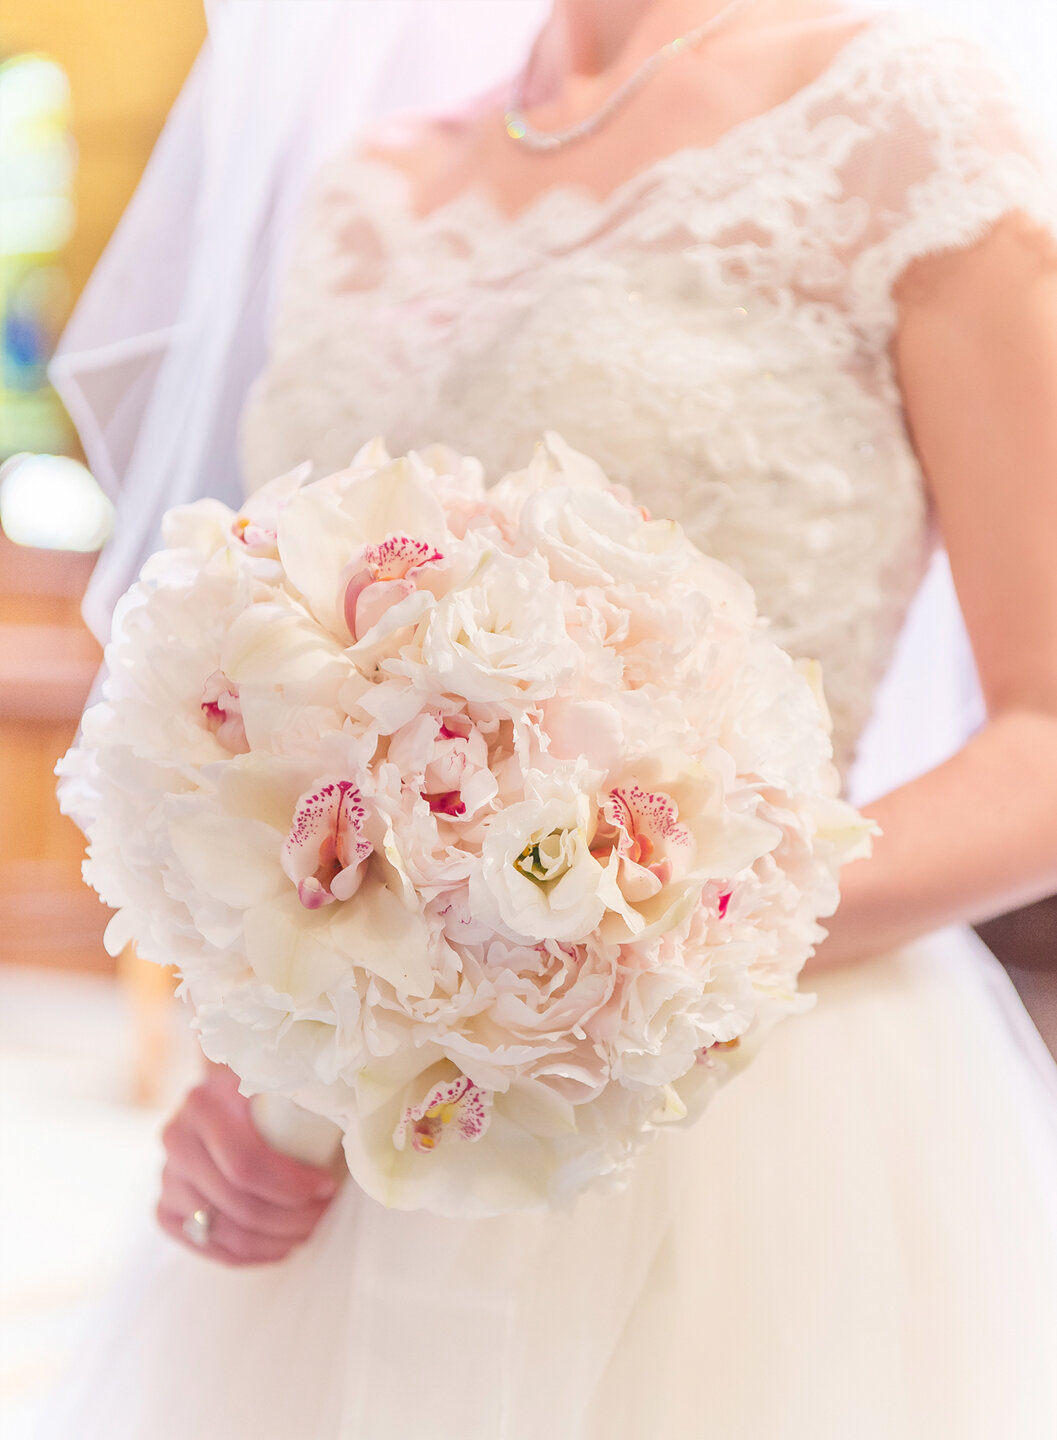 A detail of the bride and her bouquet